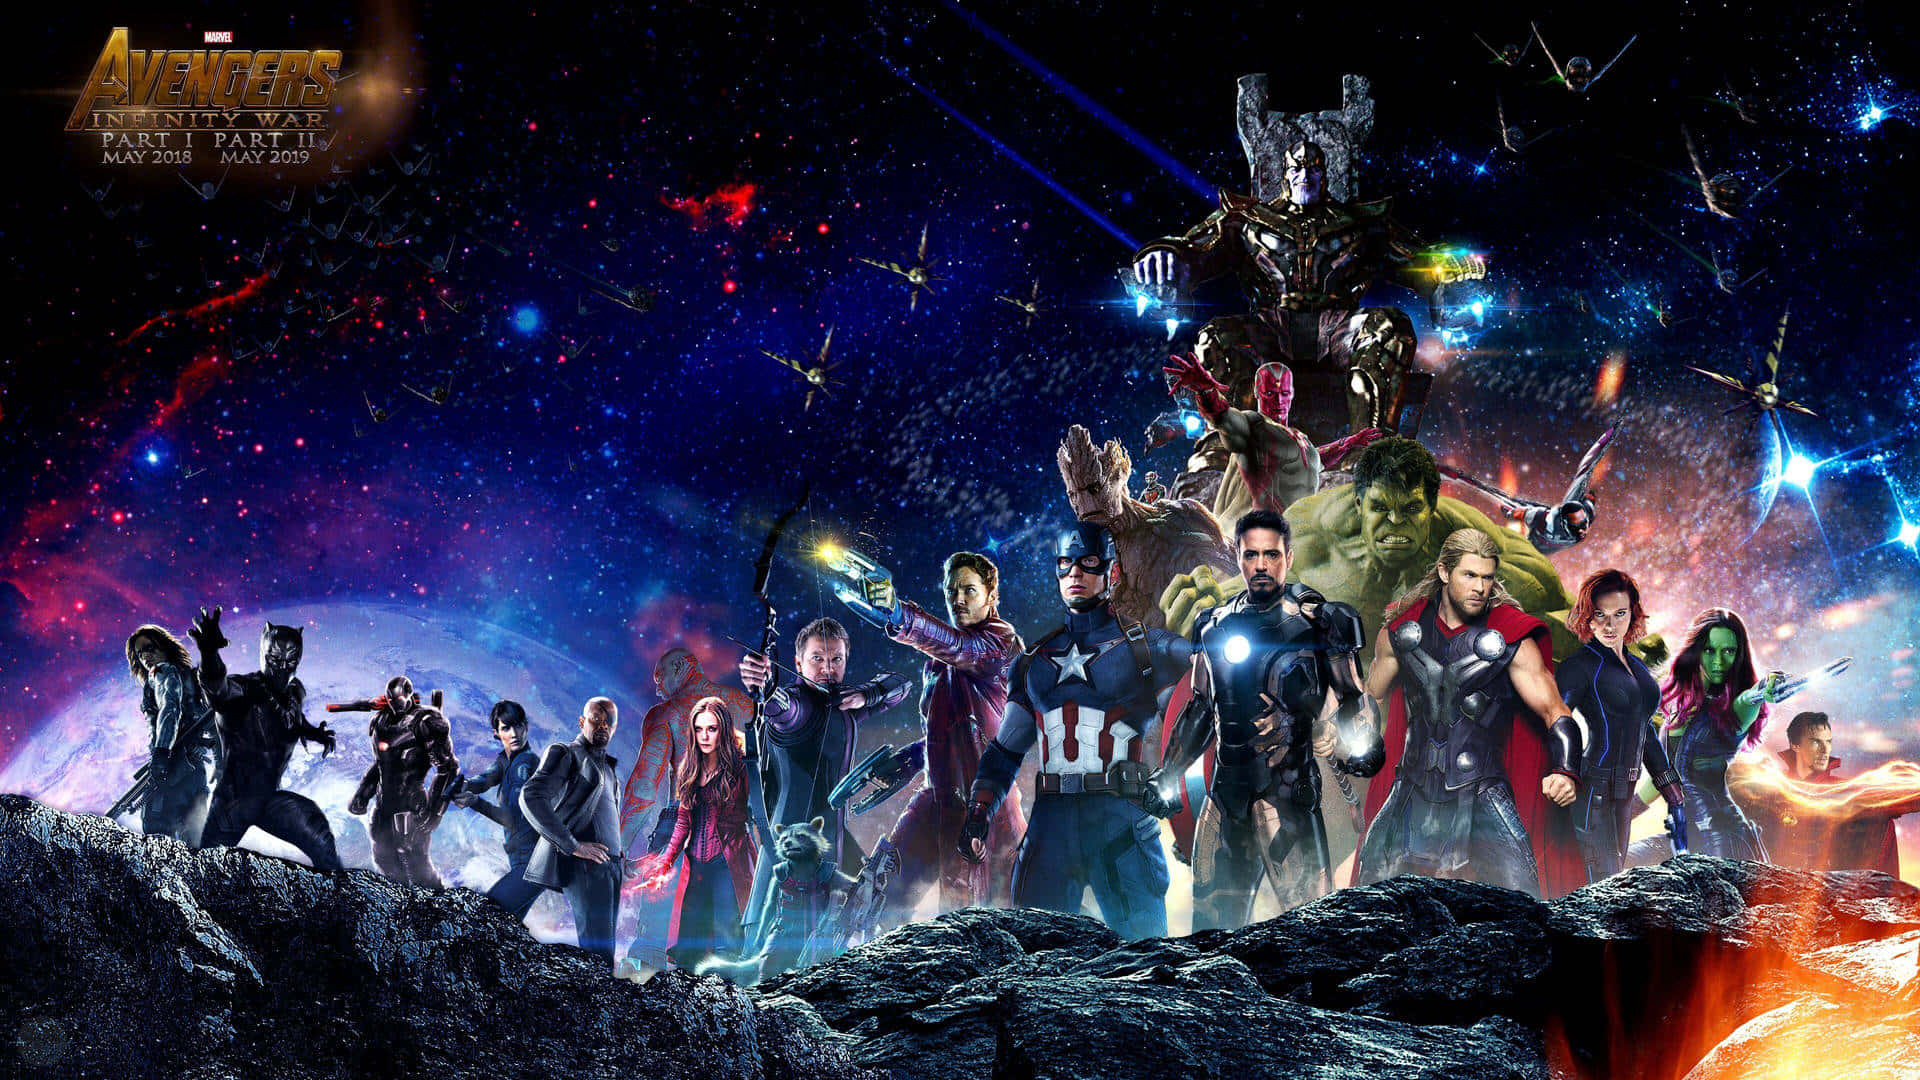 New Avengers Assemble - Heroes Ready for Action Wallpaper